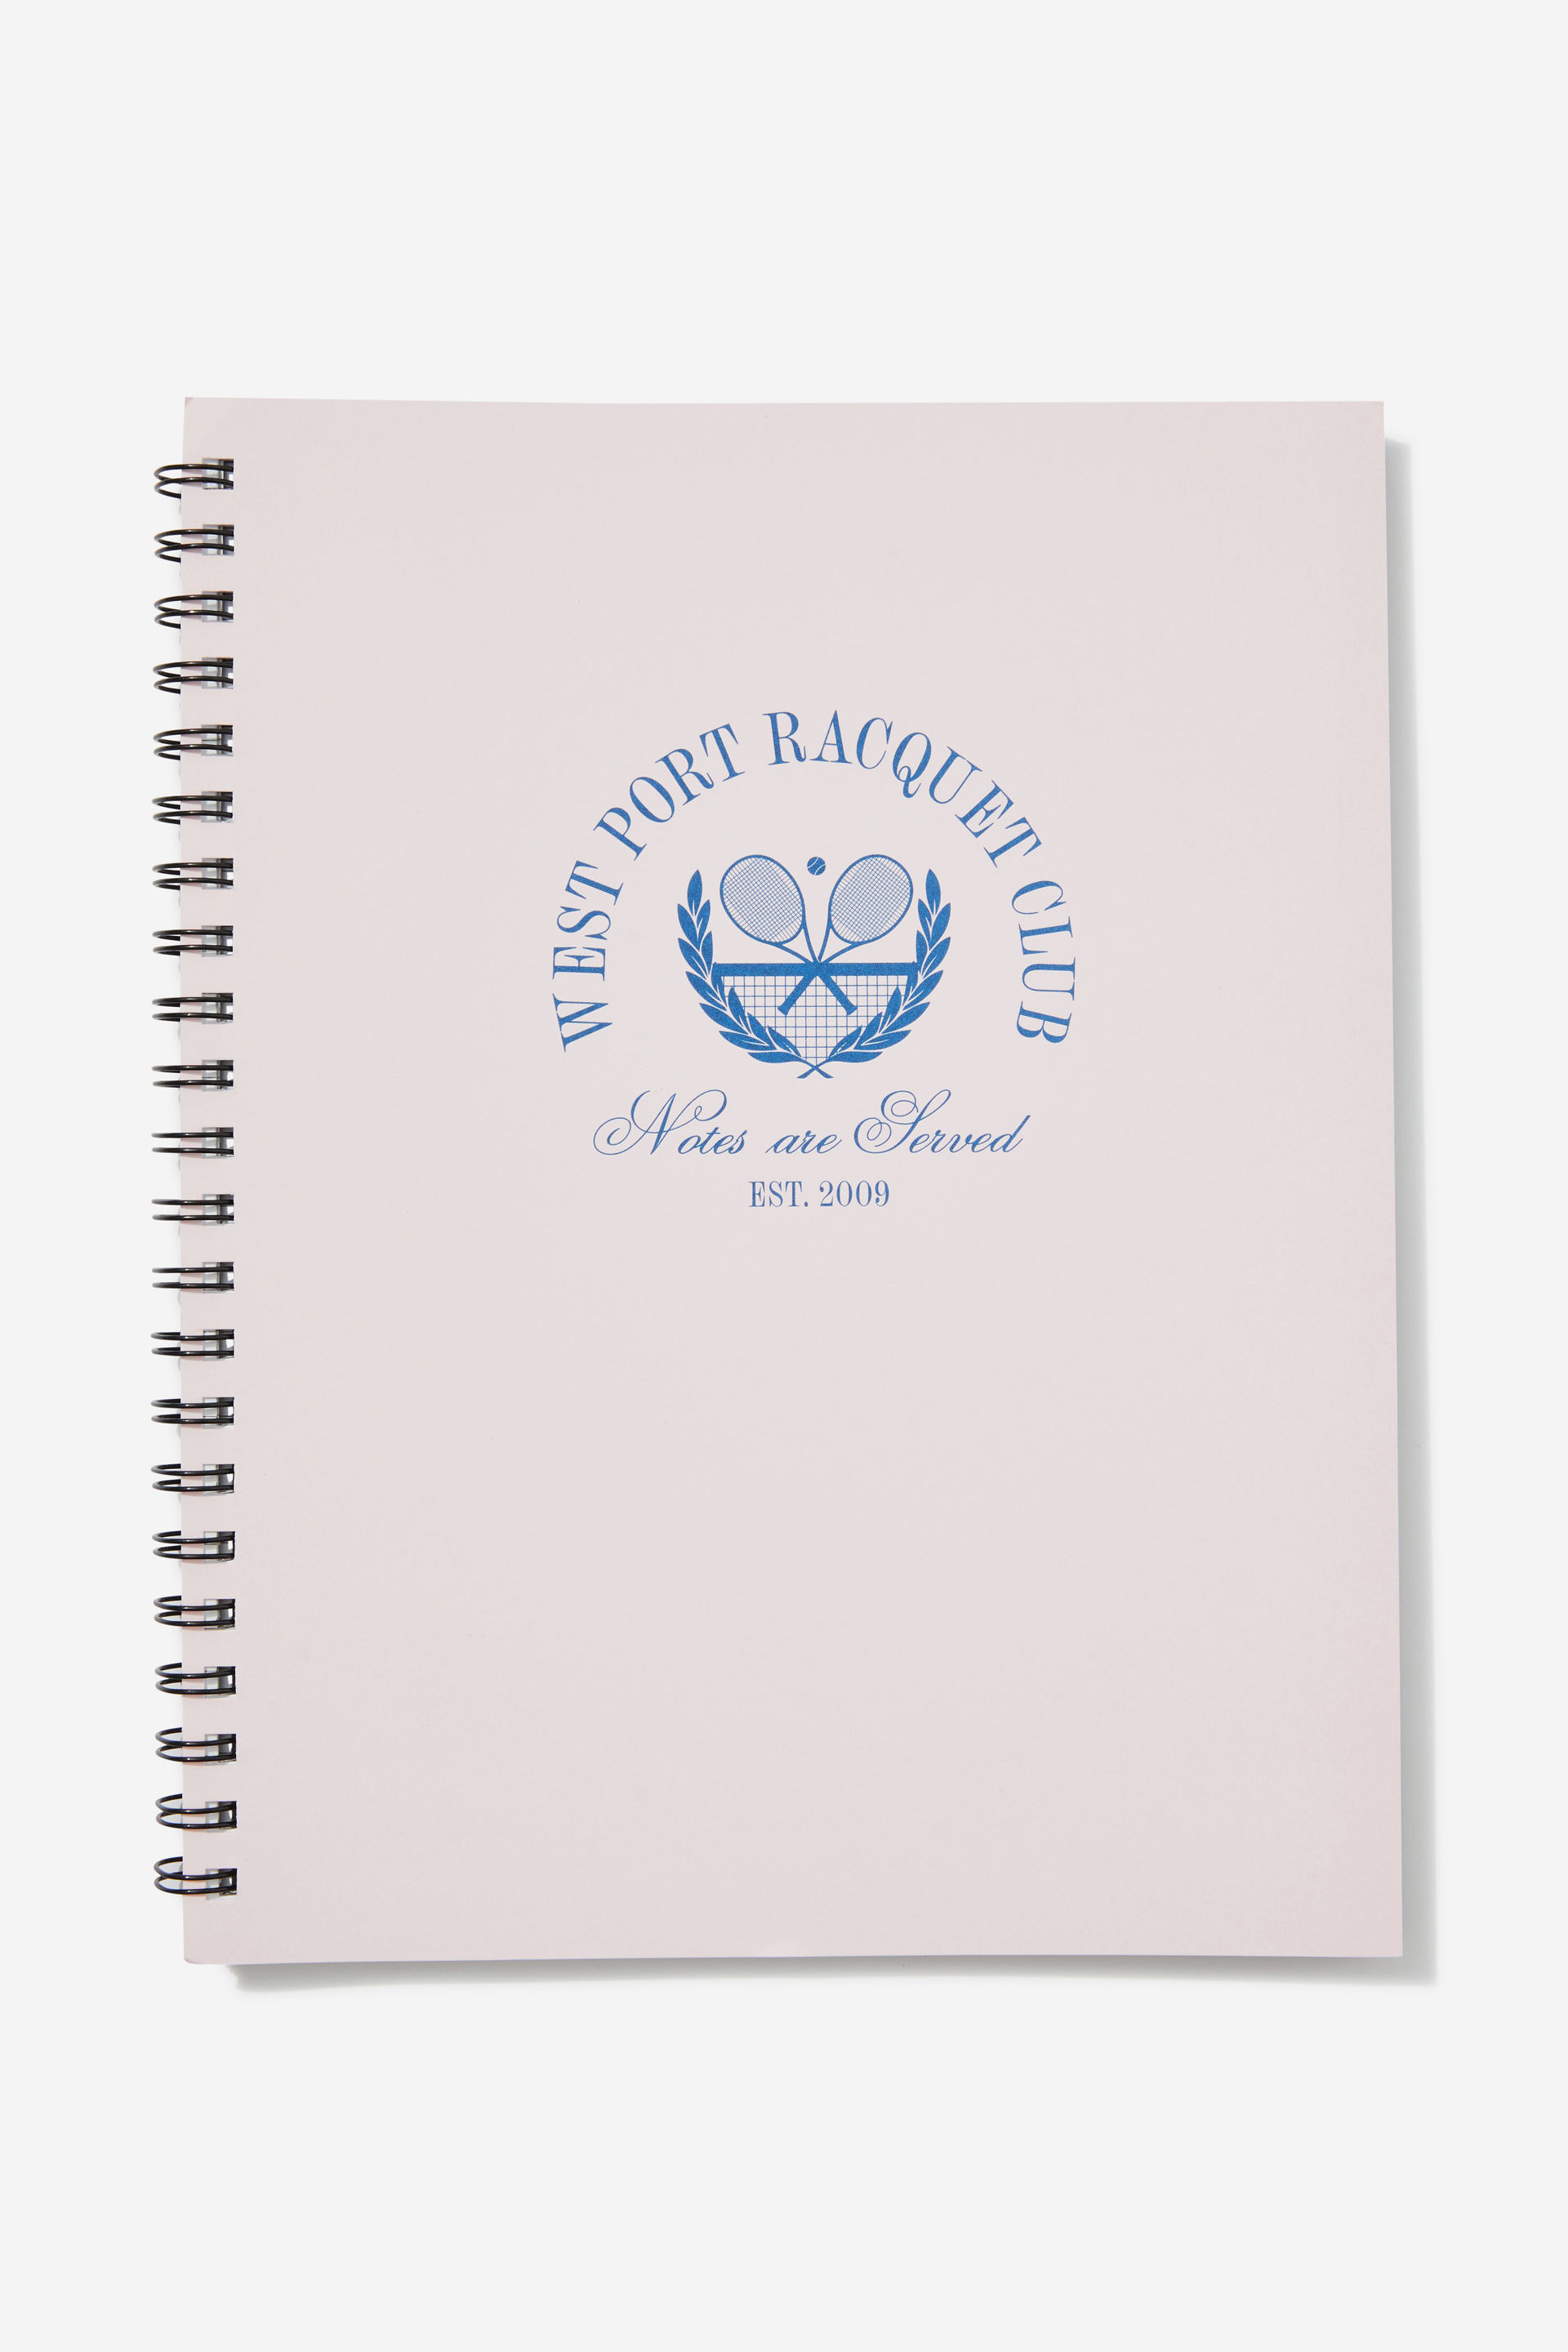 Typo - A4 Campus Notebook - Racquet club